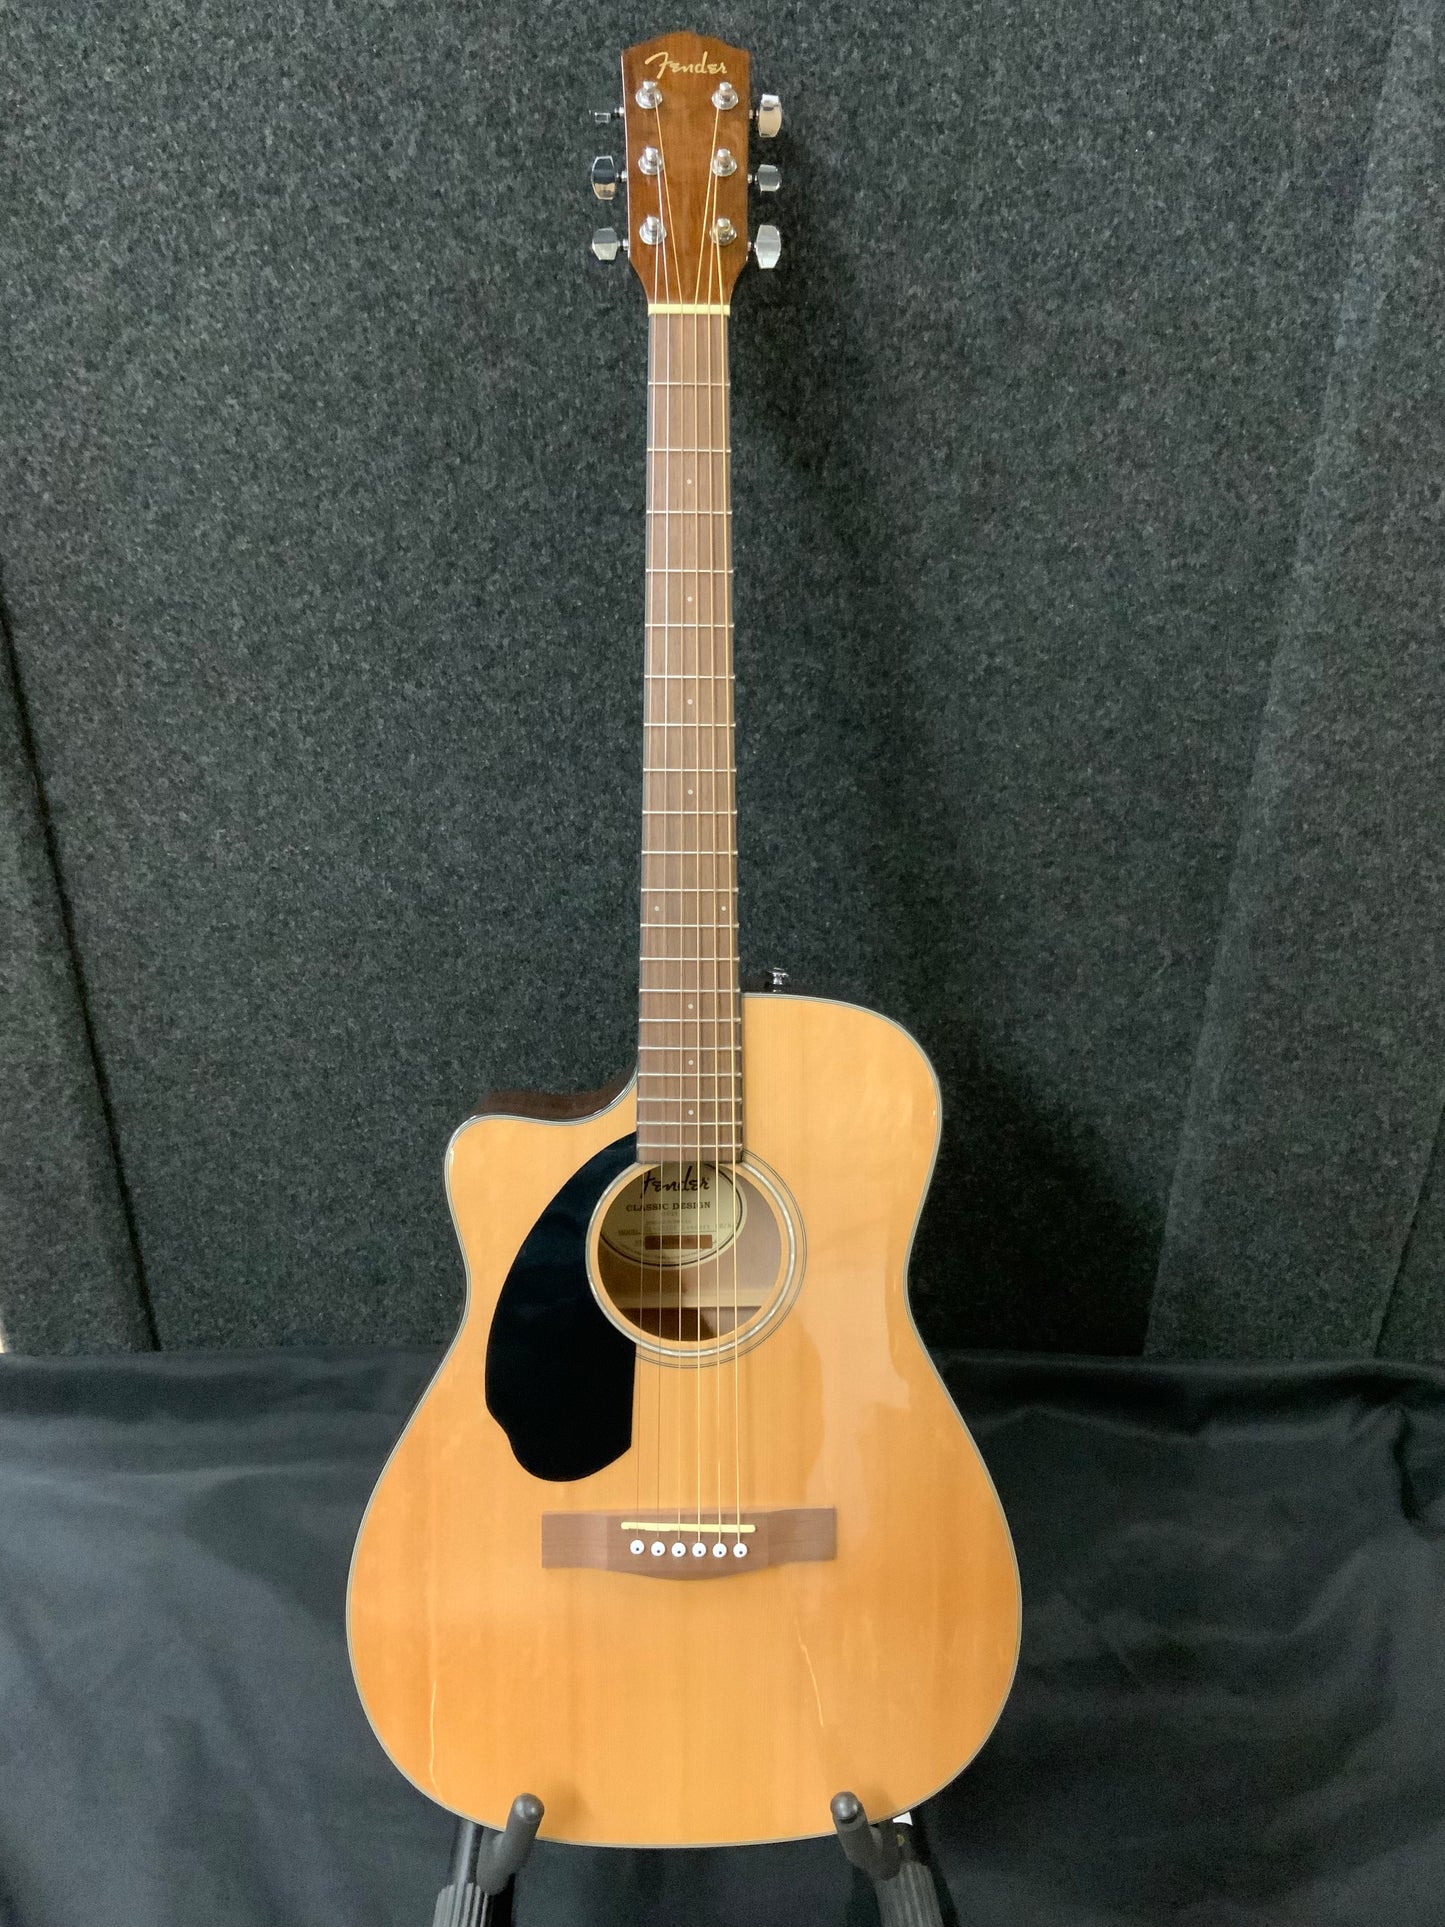 Fender CC-60SCE LH Concert Acoustic/Electric Left-handed Guitar (used-refurbished factory 2nd)